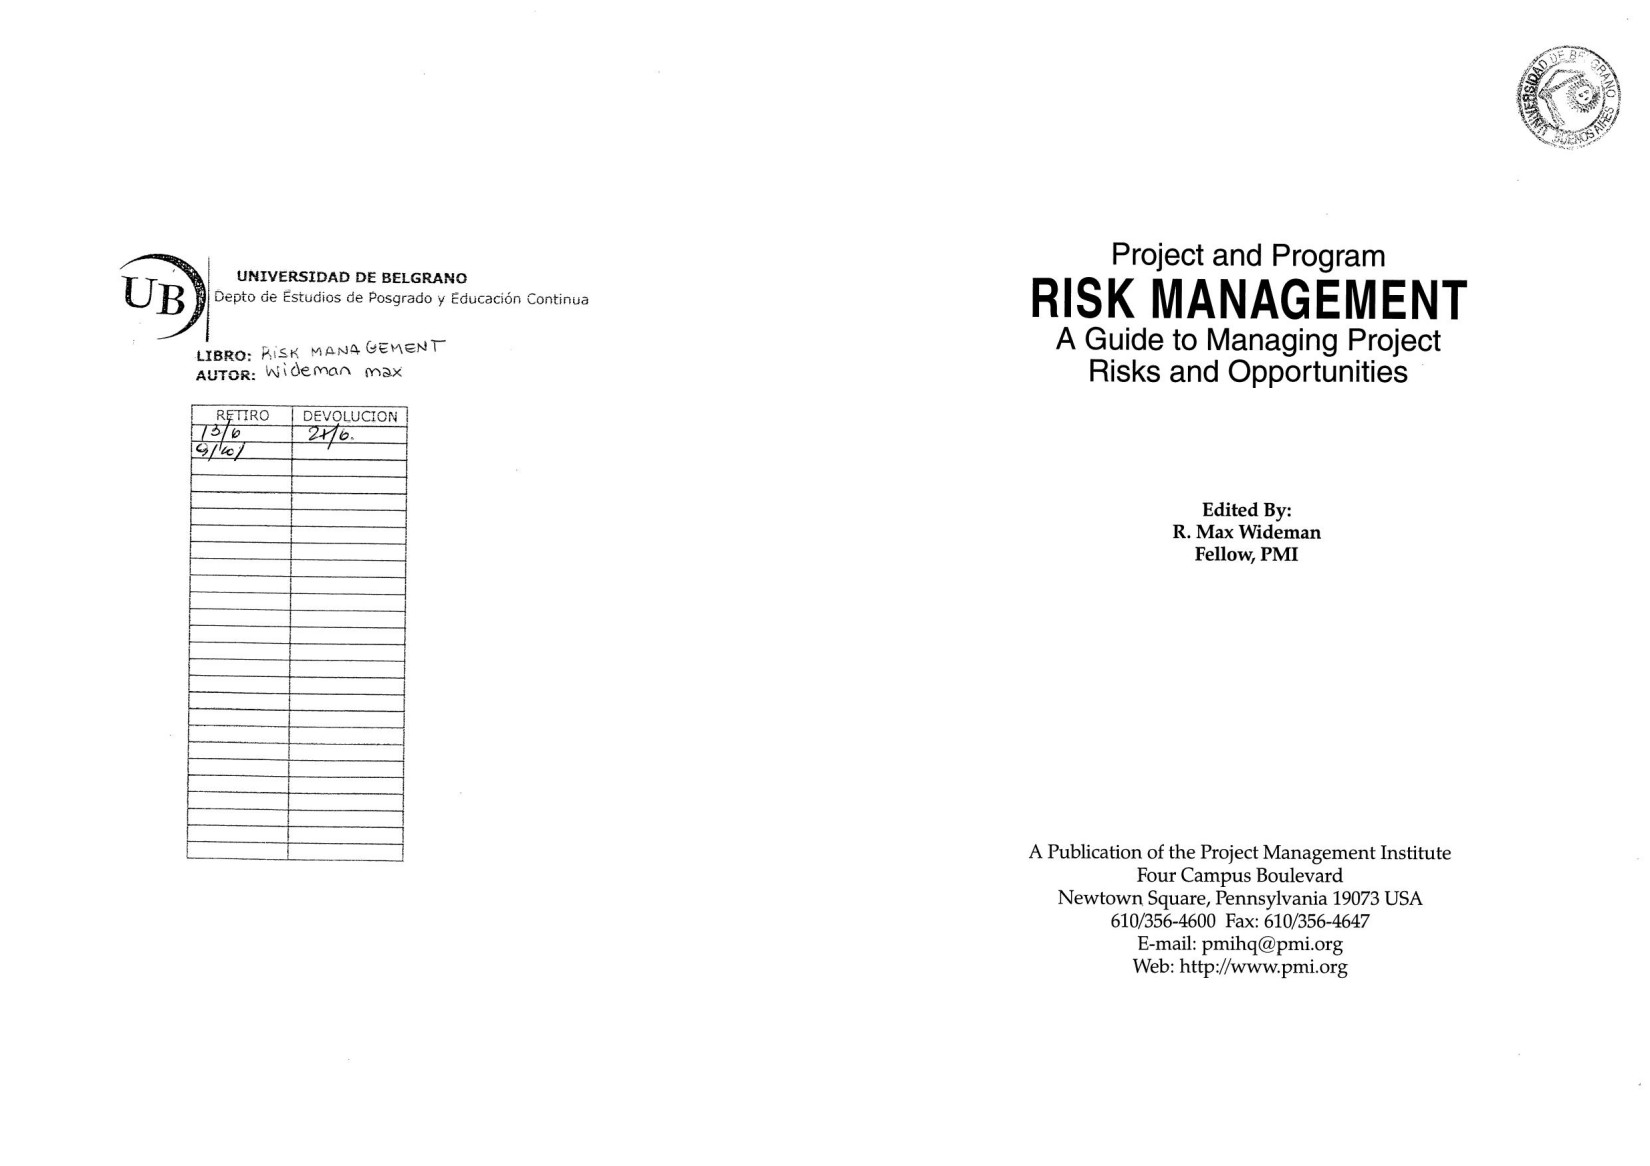 Project and Program Risk Management A Guide to Managing Project Risks and Opportunities (PMBOK® Handbooks)